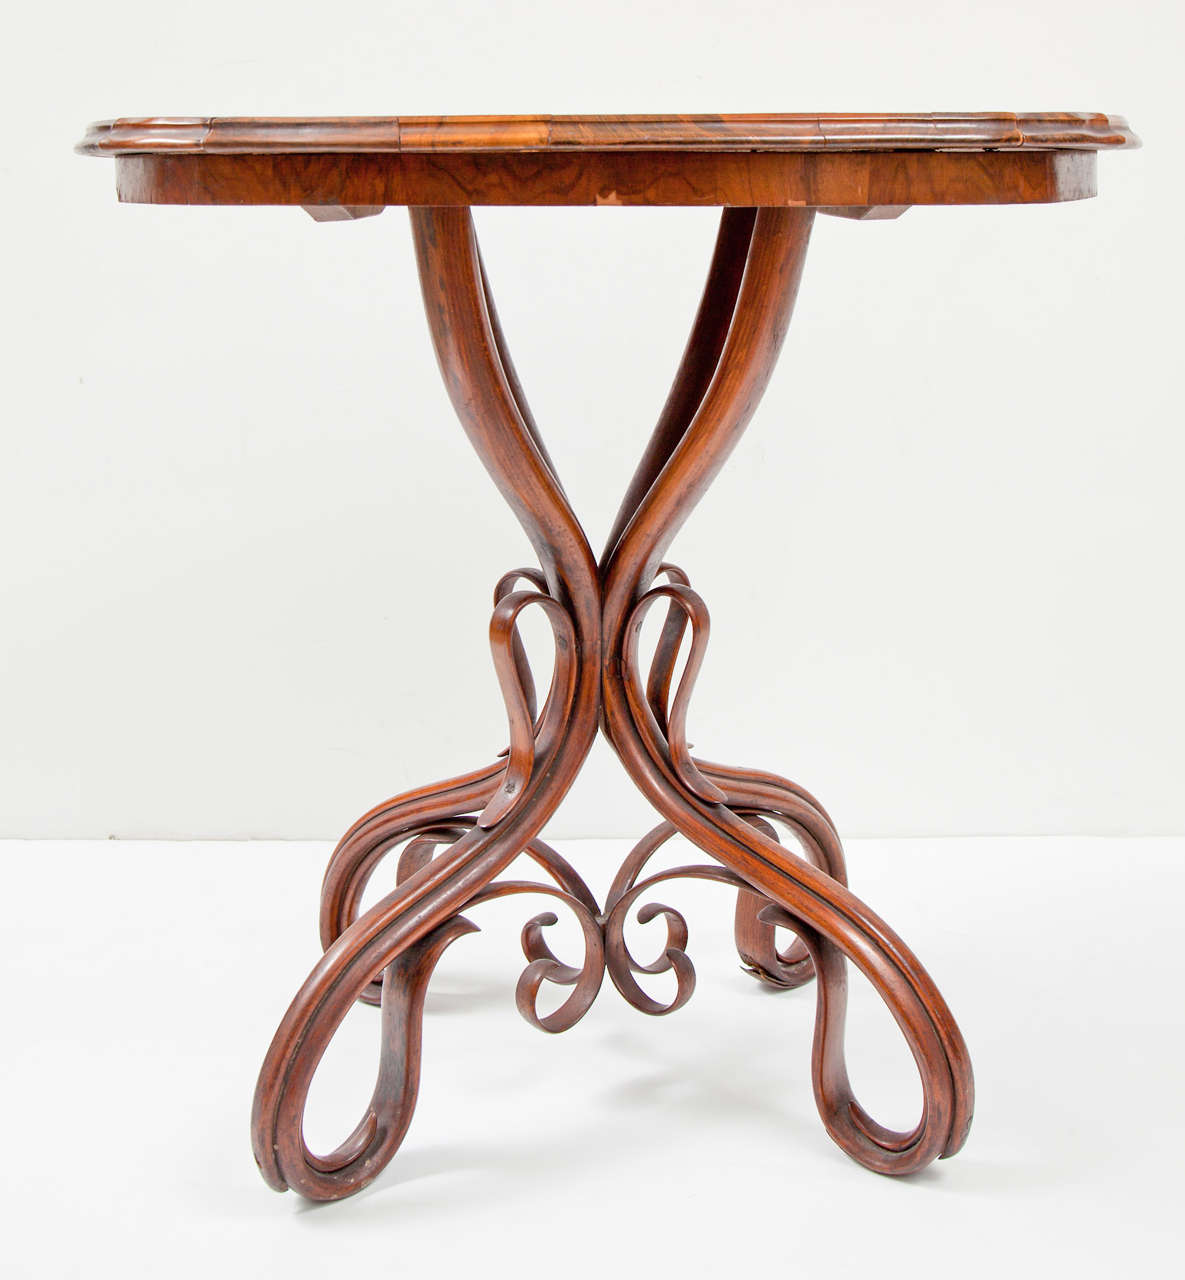 Early bentwood salon table, with walnut top and exquisite bentwood base.
Made by Gebrüder Thonet.